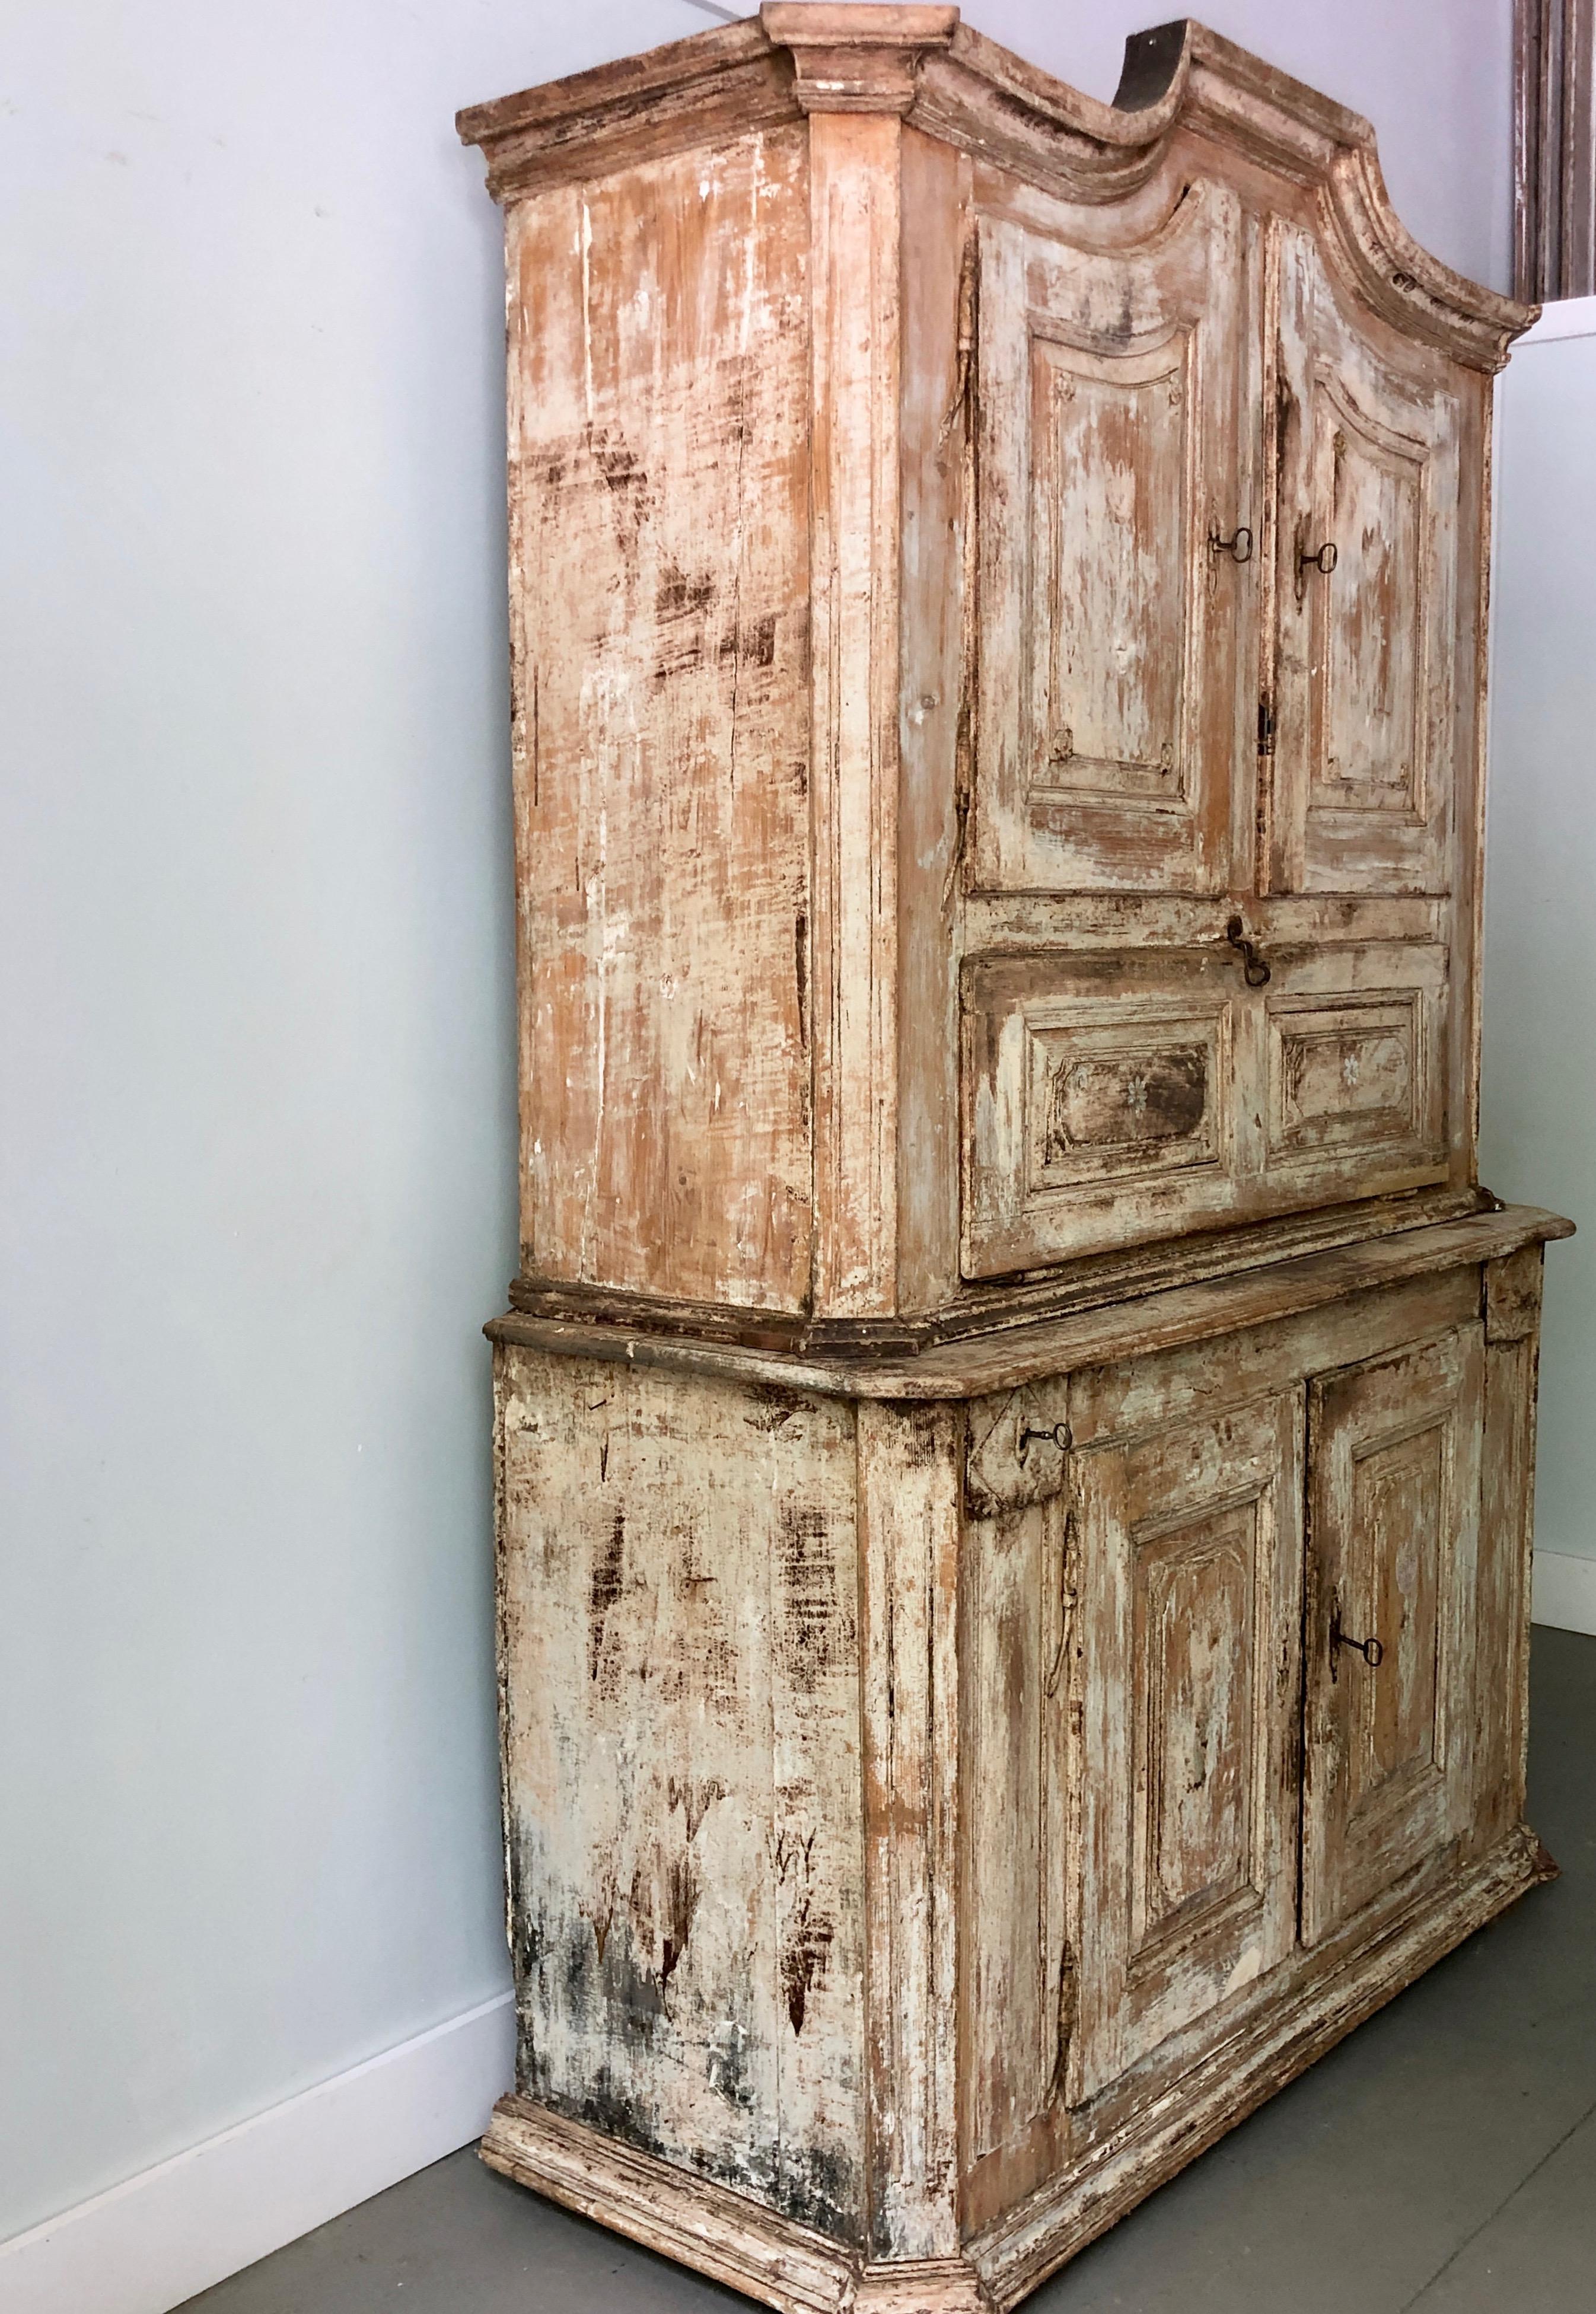 18th century very unusual two part cabinet from Alsace, France, circa 1760.
Doors hevily carved panels with some rosettes. Dry-scaped to its original finishes, traces of charming painted flowers, plenty of storage in upper and lower cabinet with